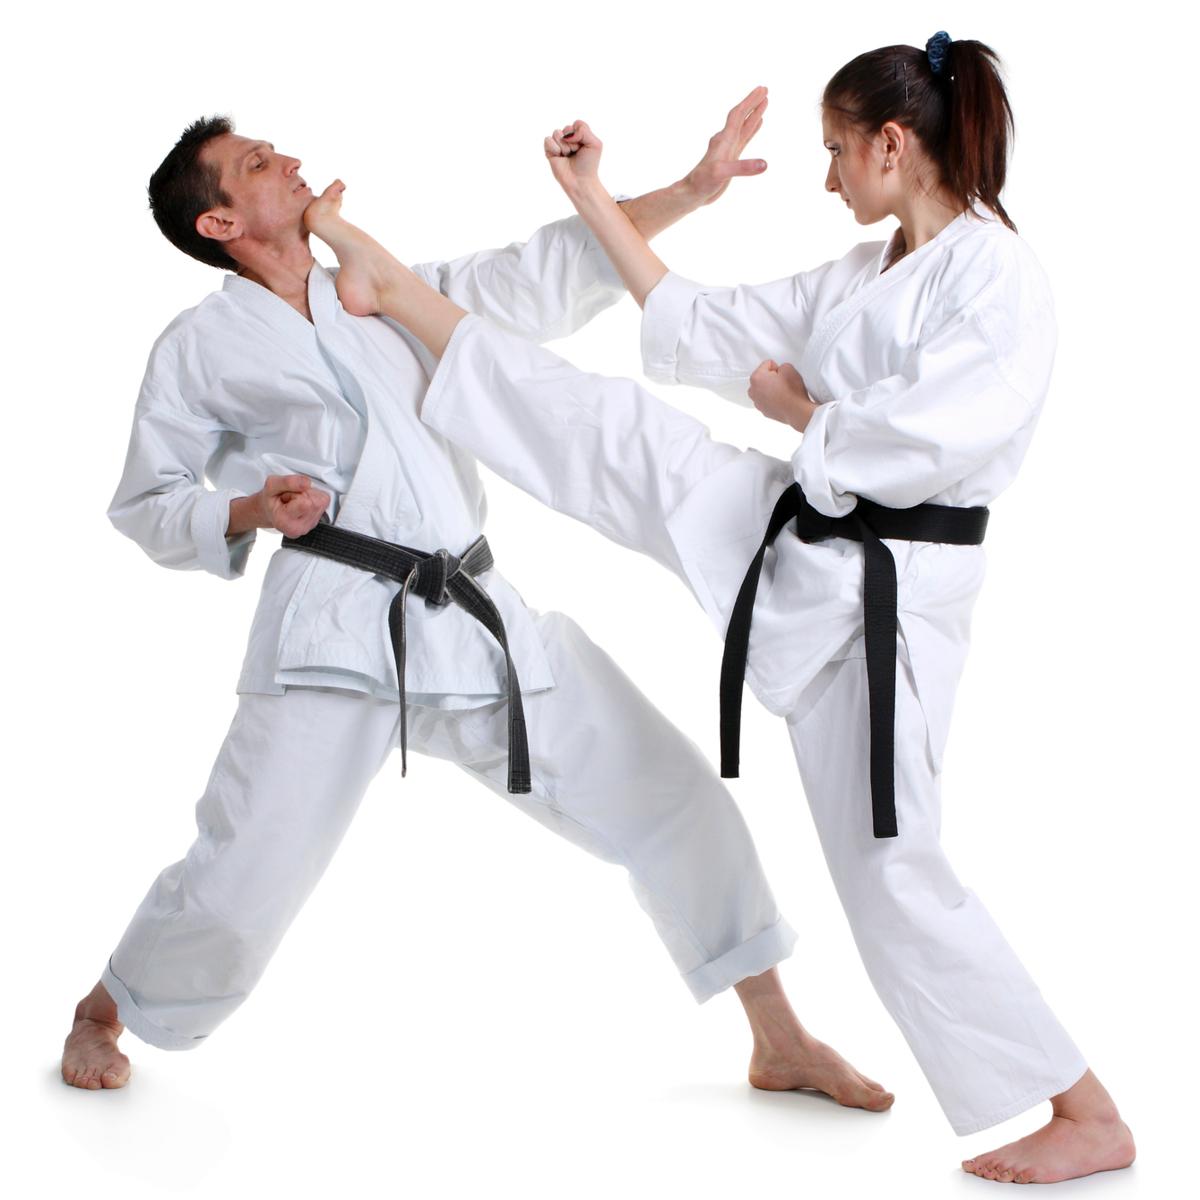 karate-moves-a-guide-to-the-basic-blocks-strikes-and-kicks